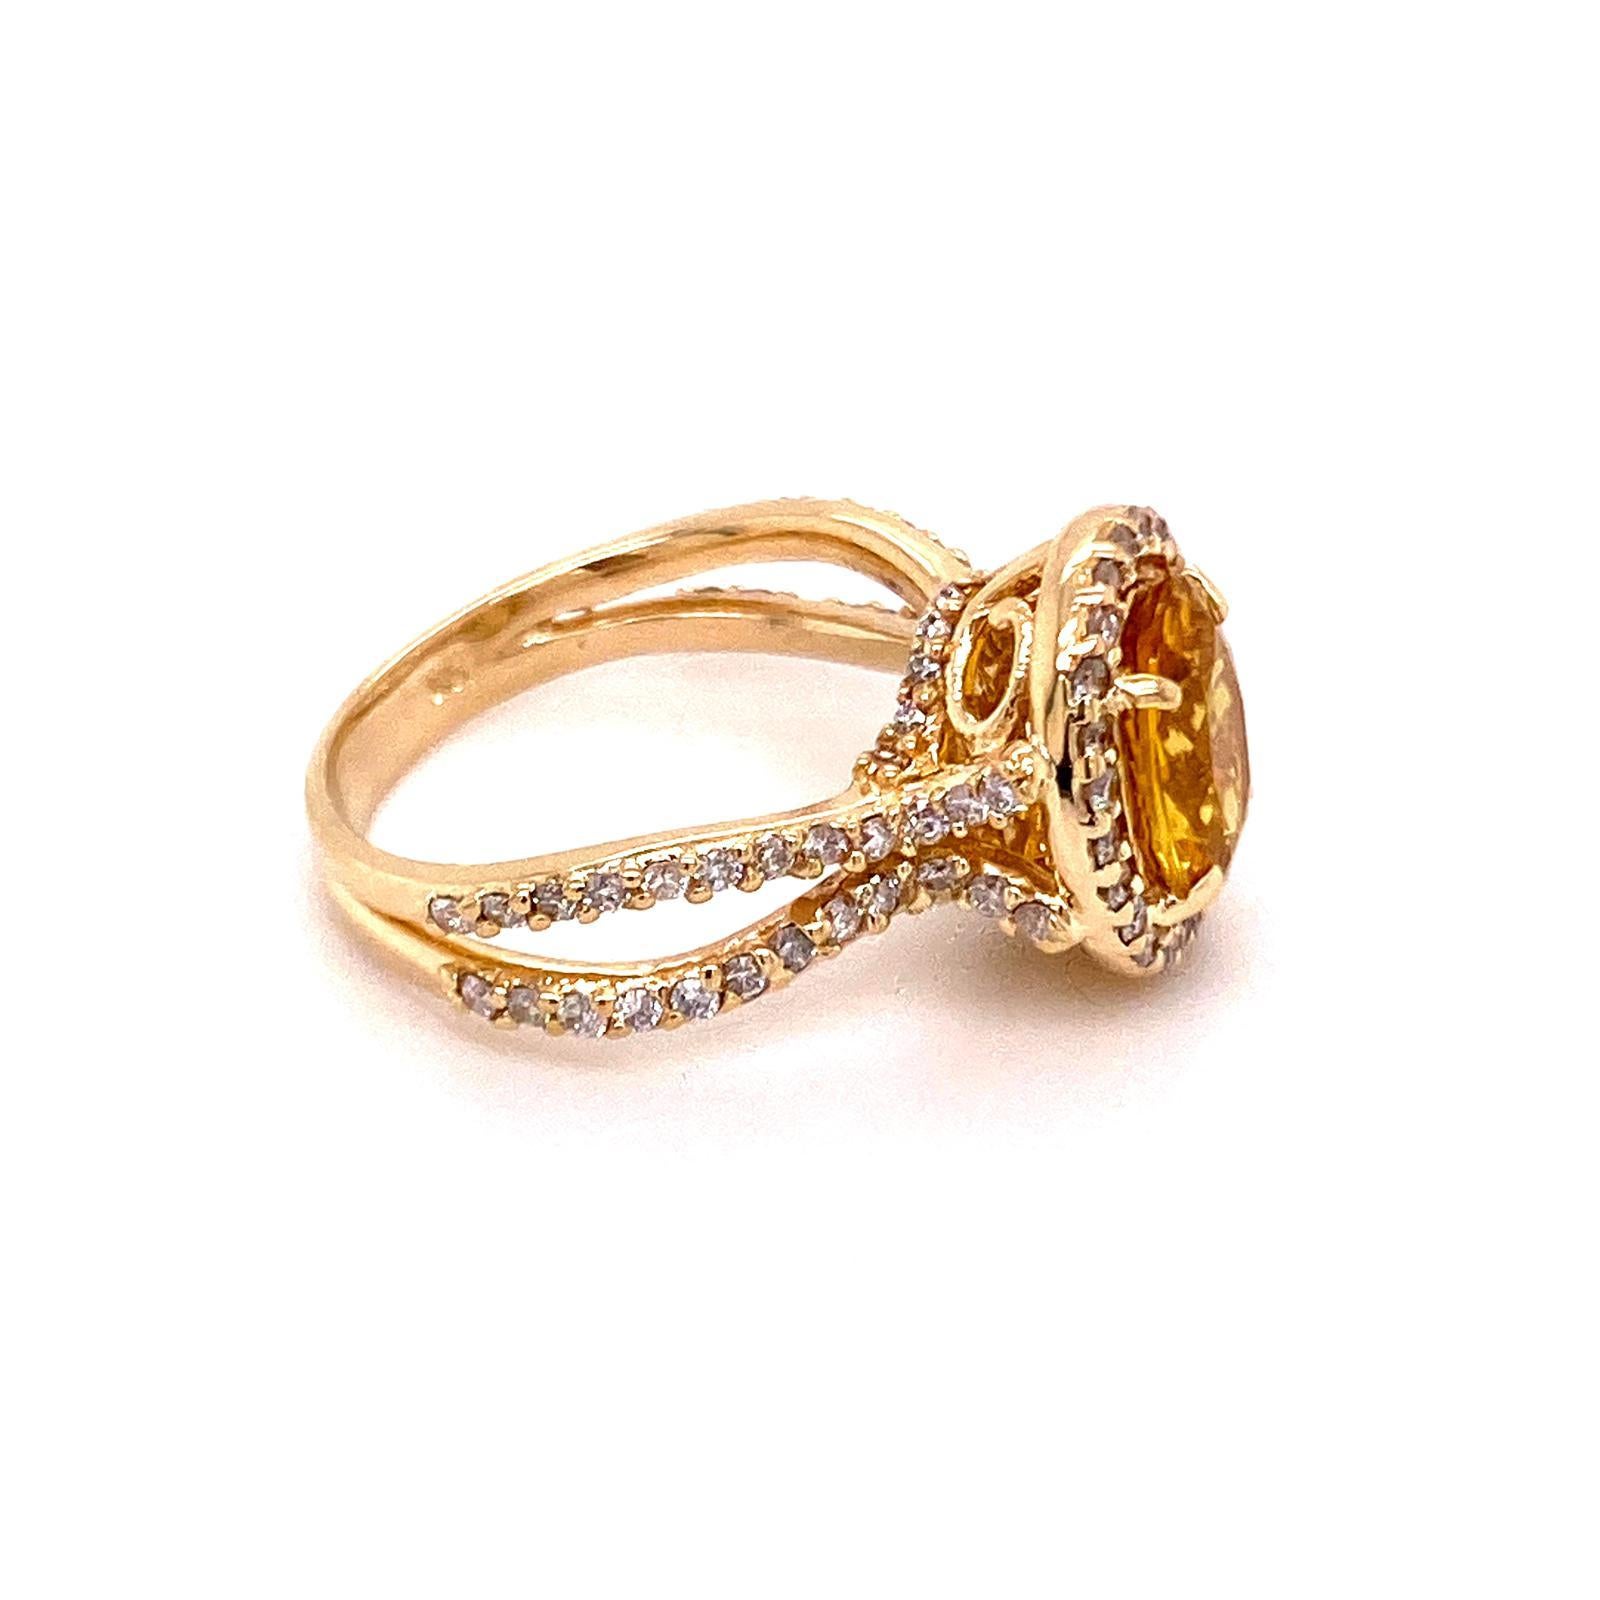 14K YELLOW GOLD YELLOW CEYLON SAPPHIRE RING:5.91 GRAMS/DIAMOND:1.12CT/YELLOW SAPPHIRE:2.31CT/#GVR1030 **Warmly crafted in 14kt yellow gold, this delicate style features a dazzling 2.31ct oval shape rare Yellow Sapphire center stone. Yellow Sapphire